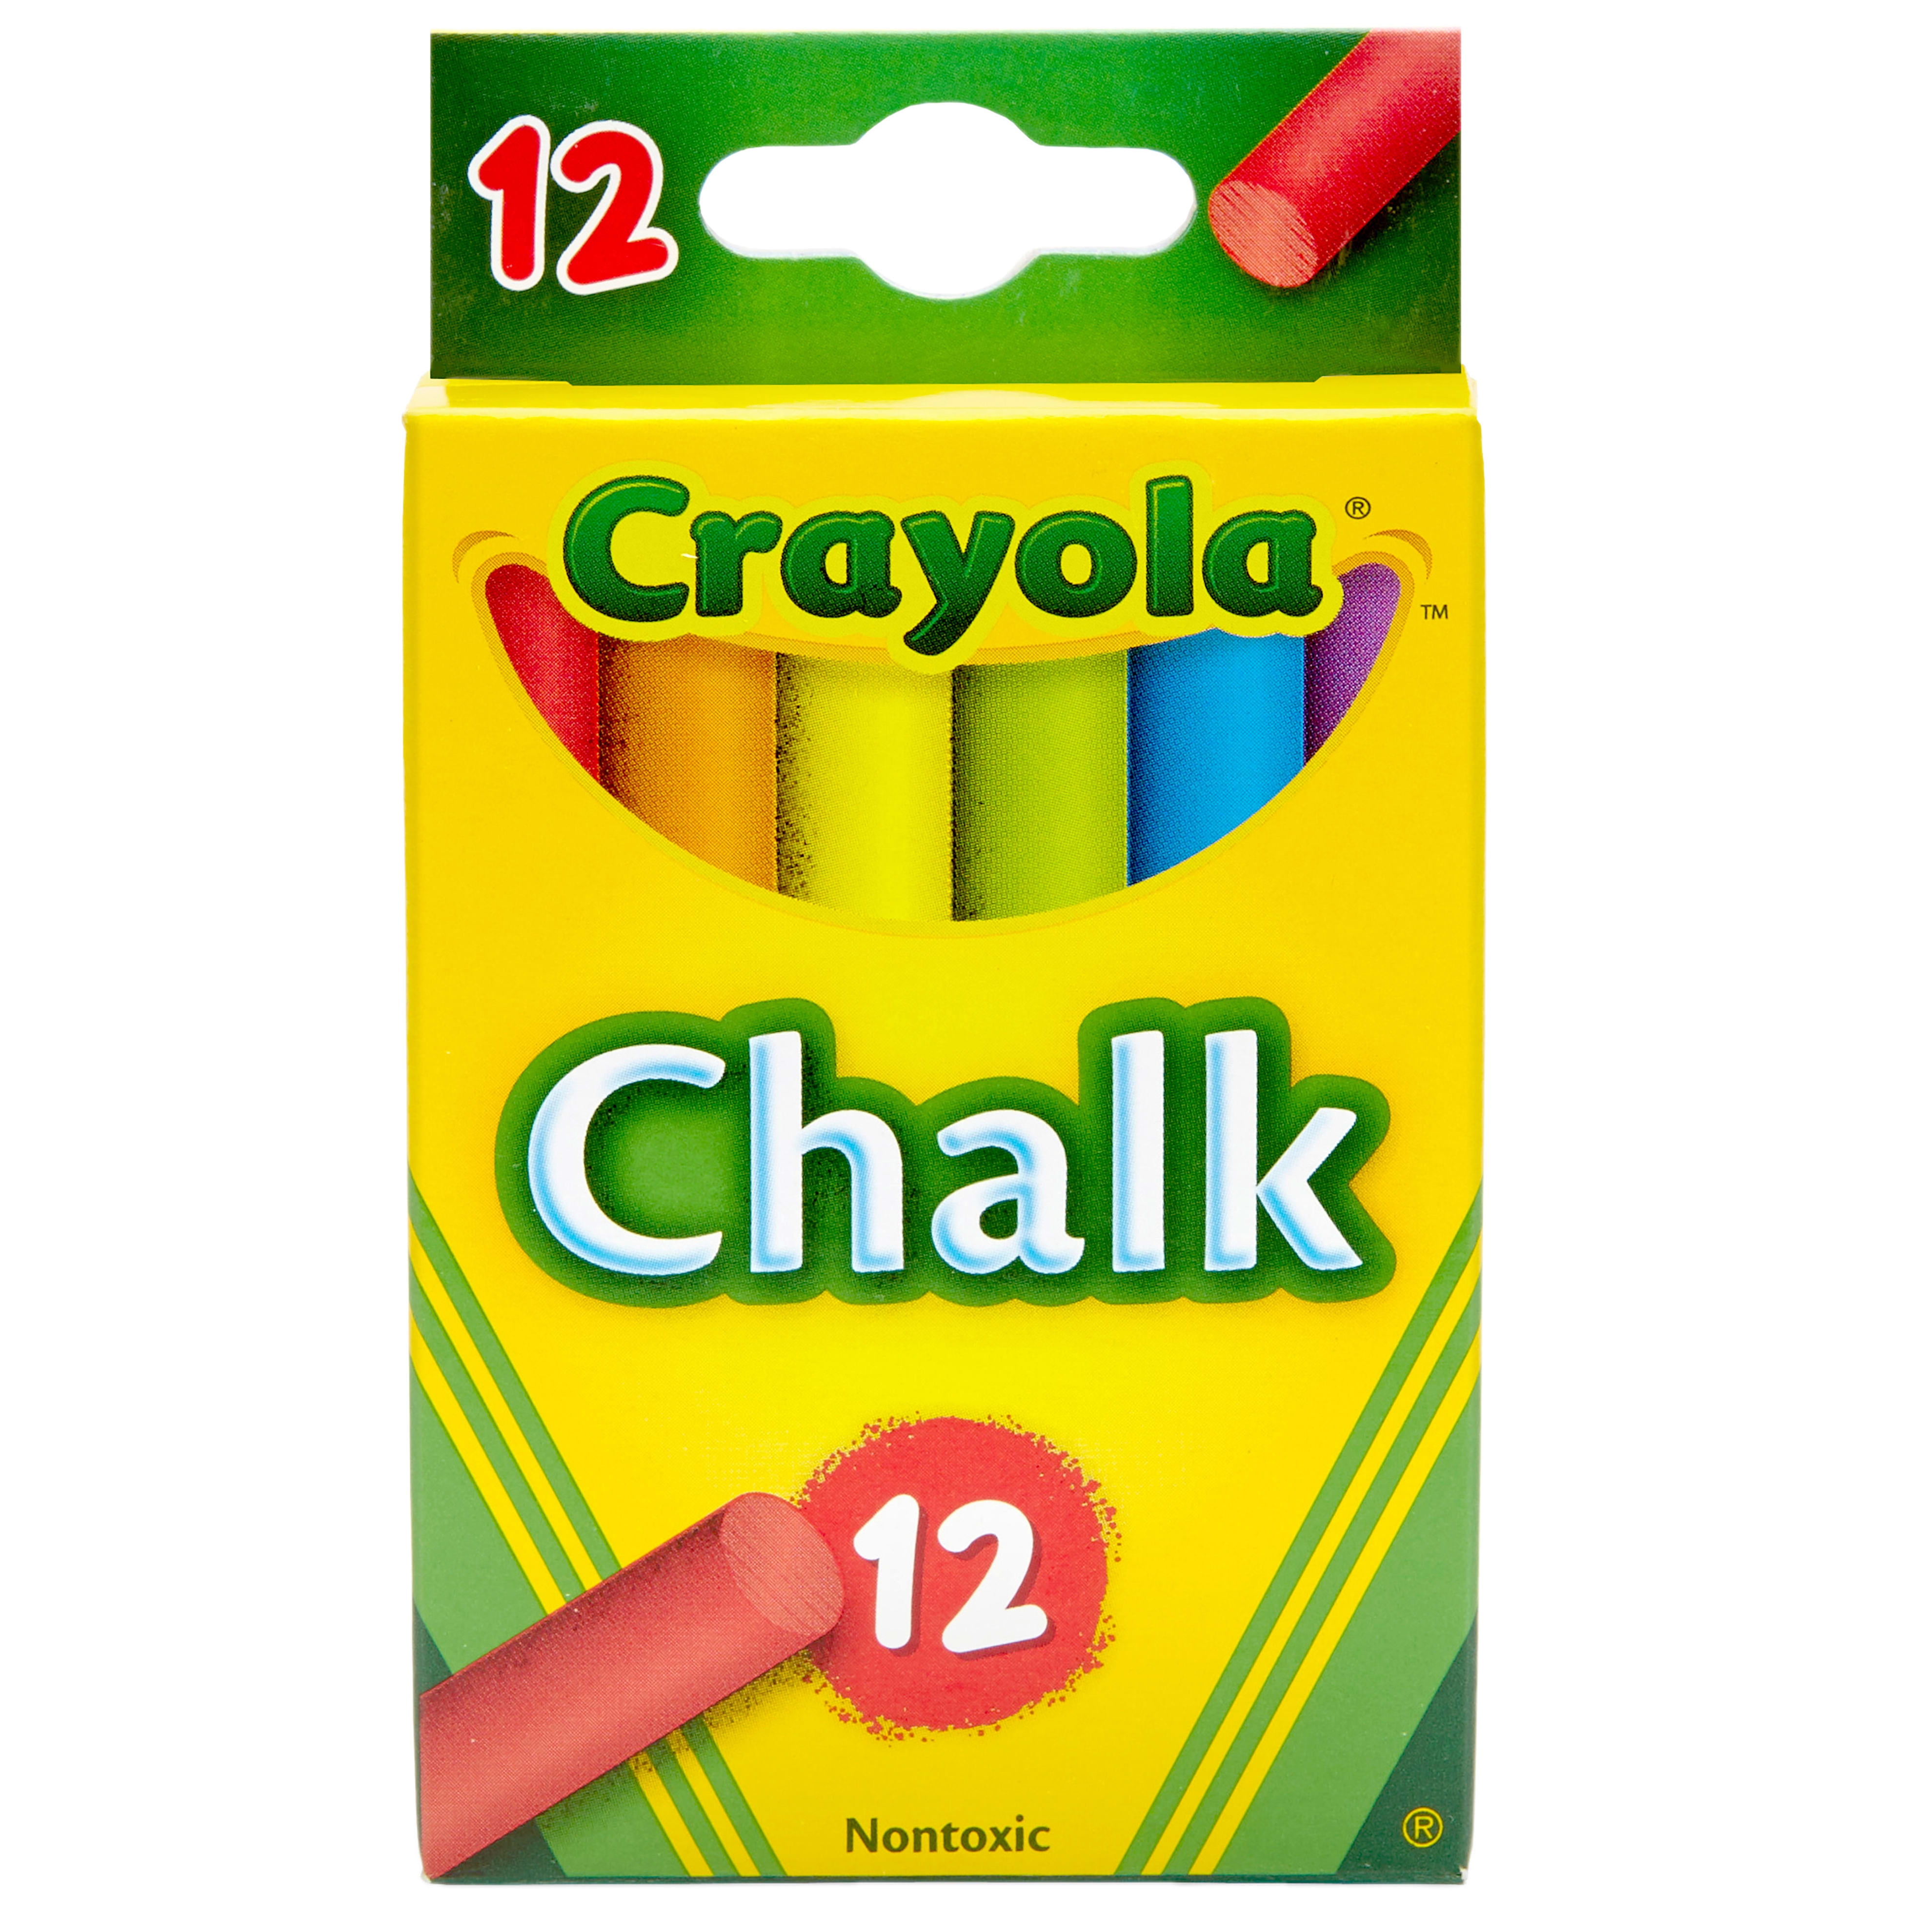 Omyacolor Chalkboard Chalk 12 PC Coated Yellow Colored